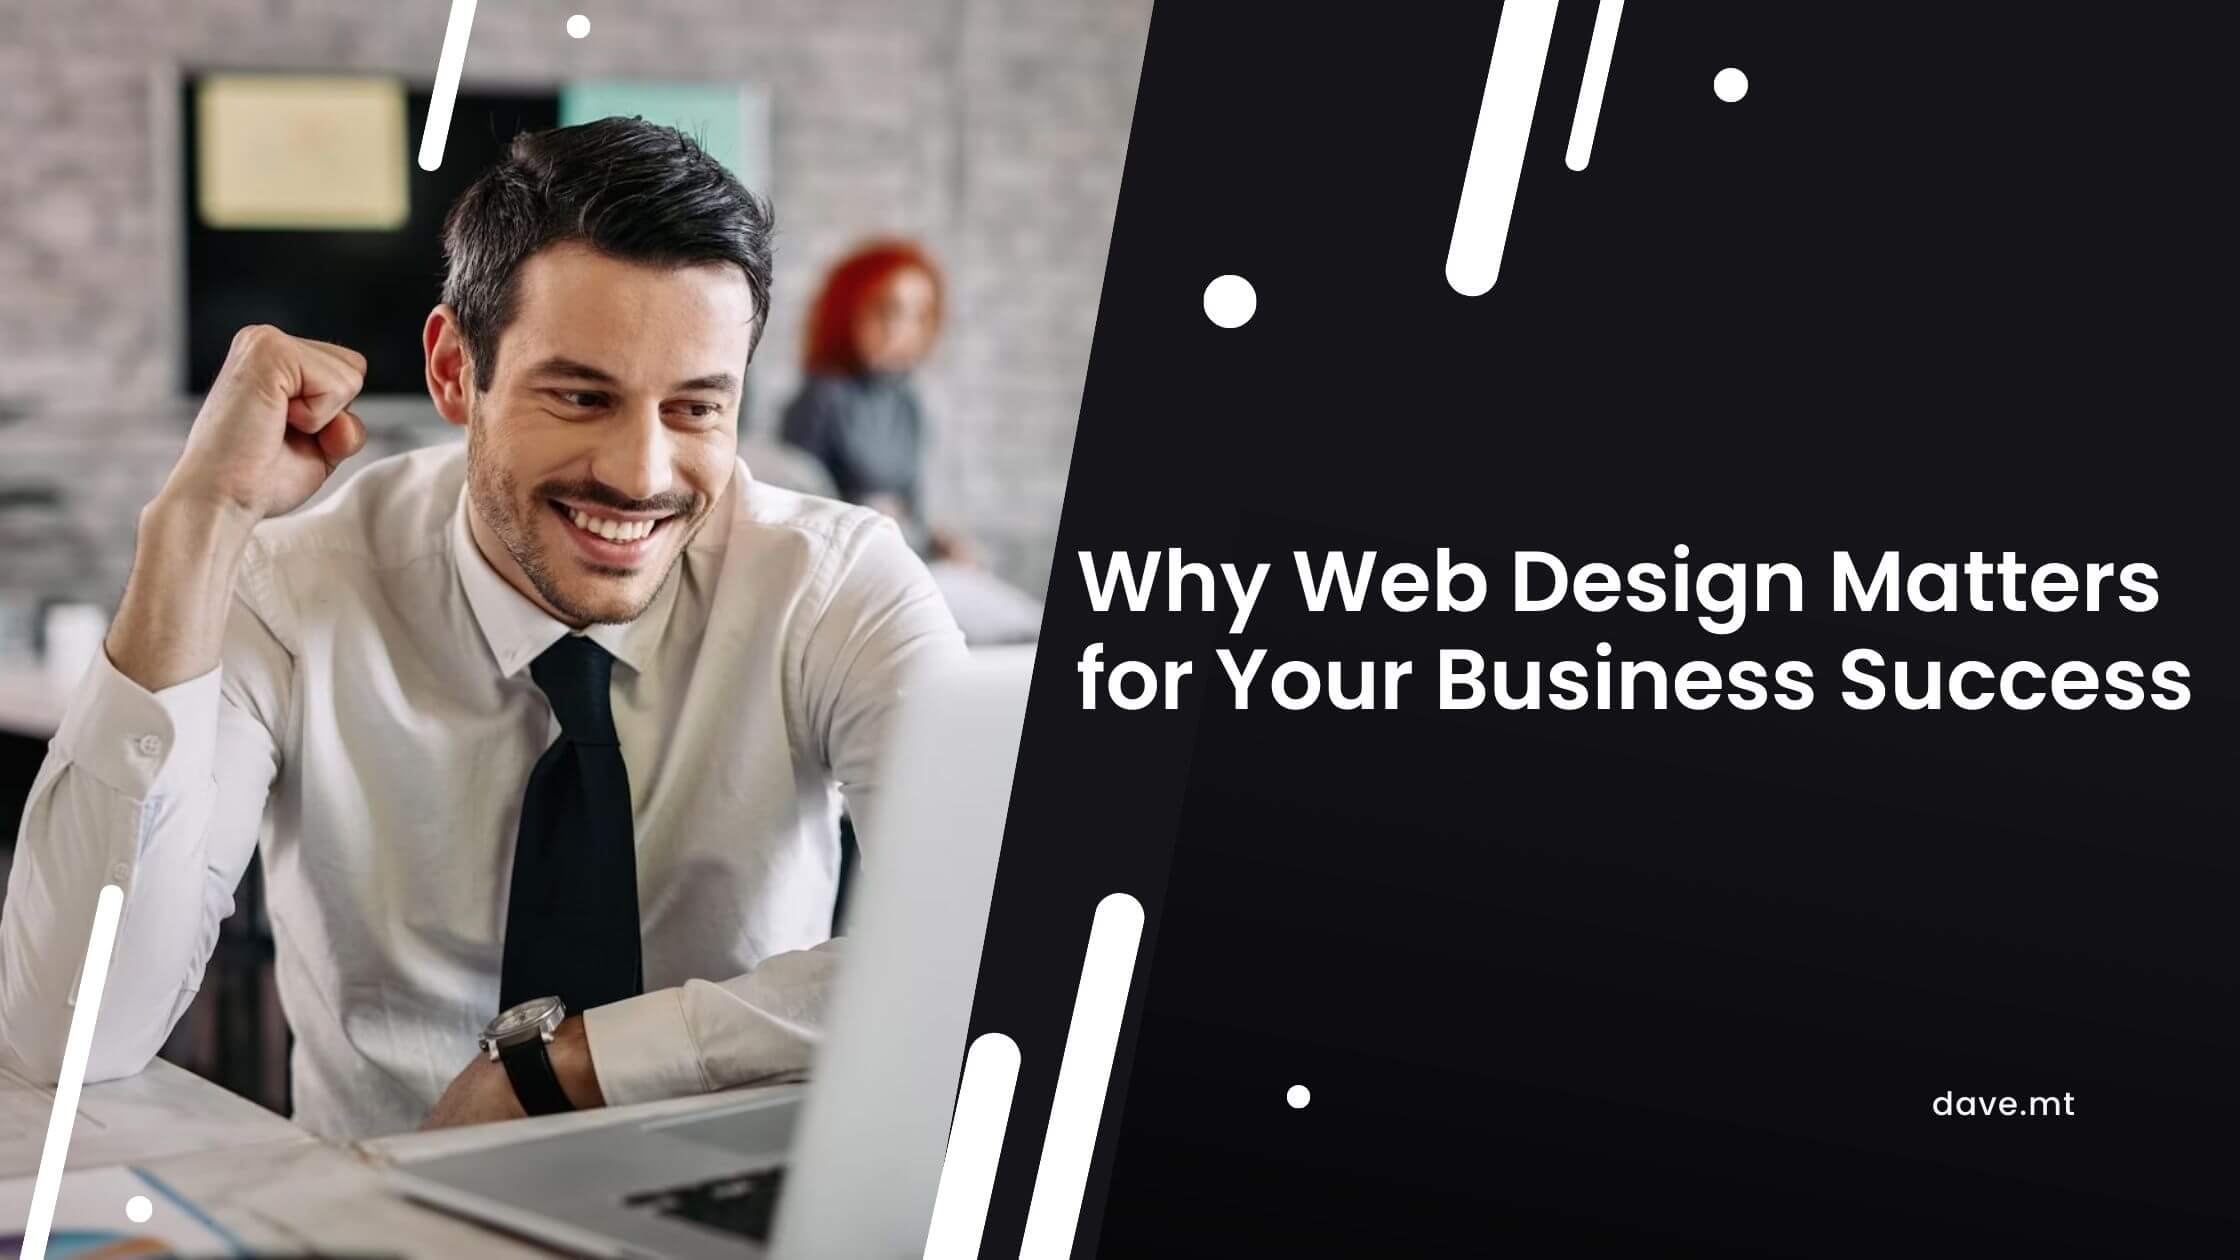 Why Web Design Matters for Your Business Success